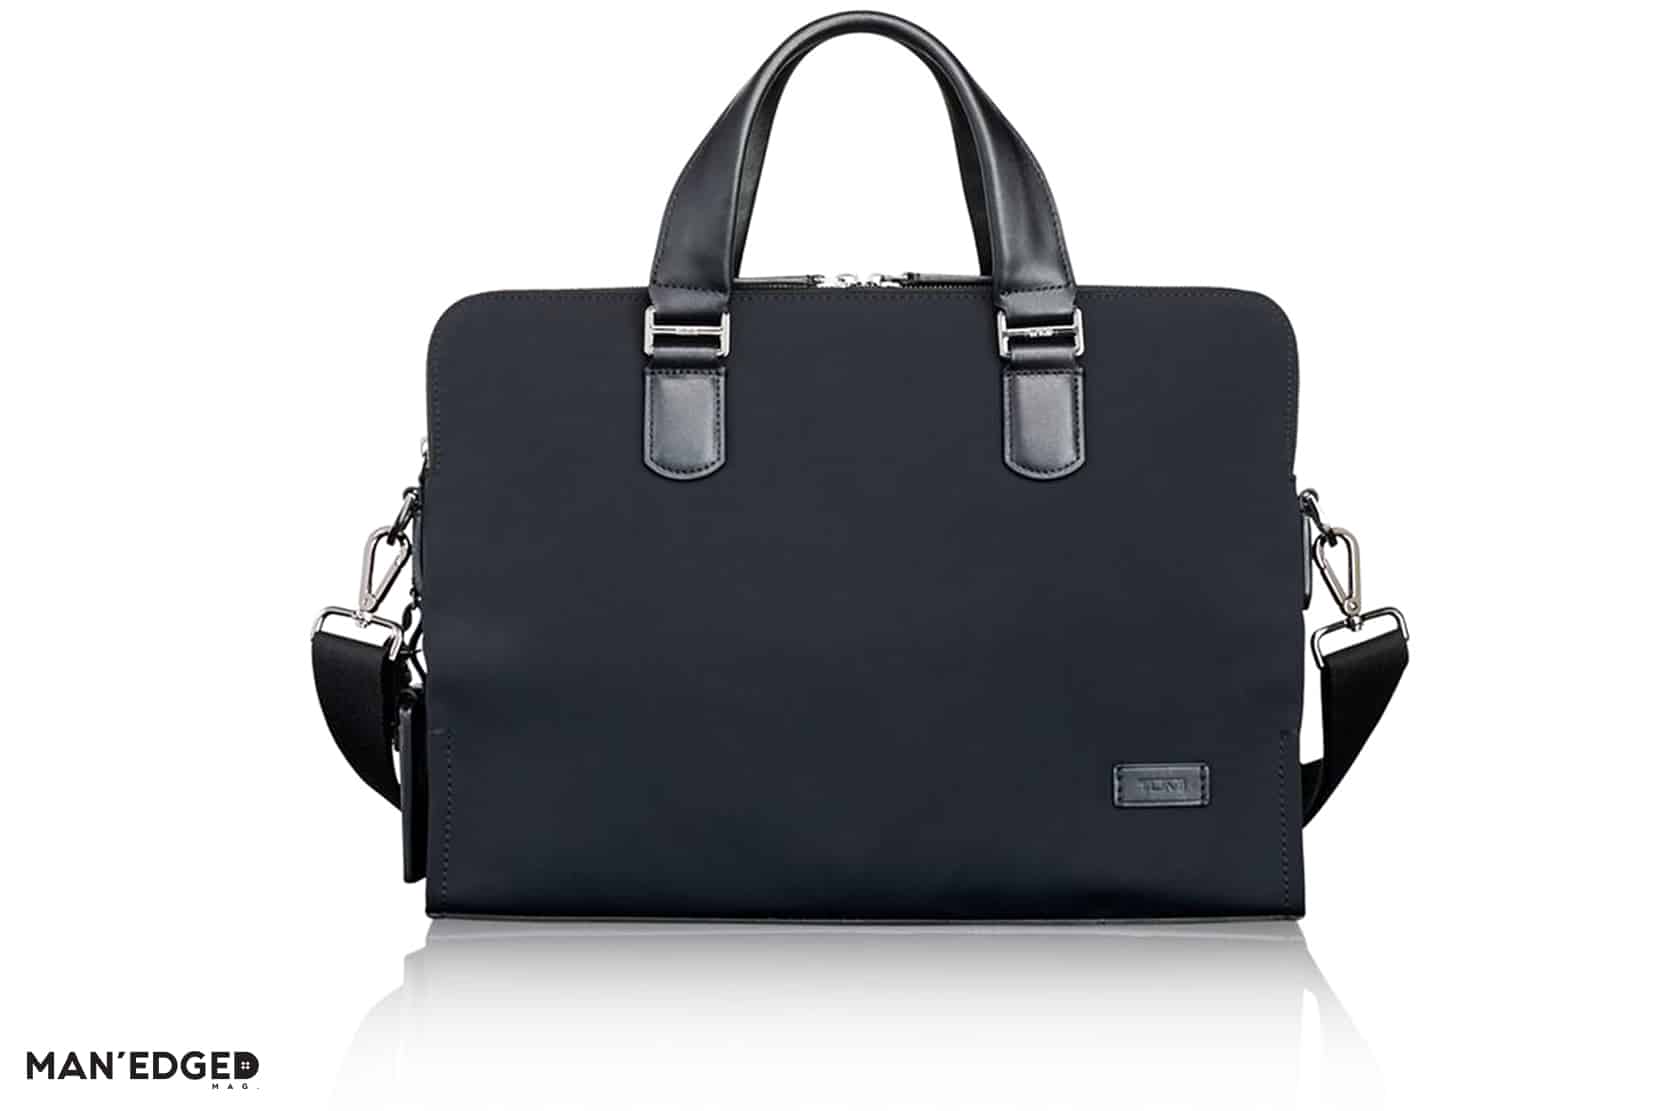 Gift Ideas for the journeyman featuring men's Tumi Bag